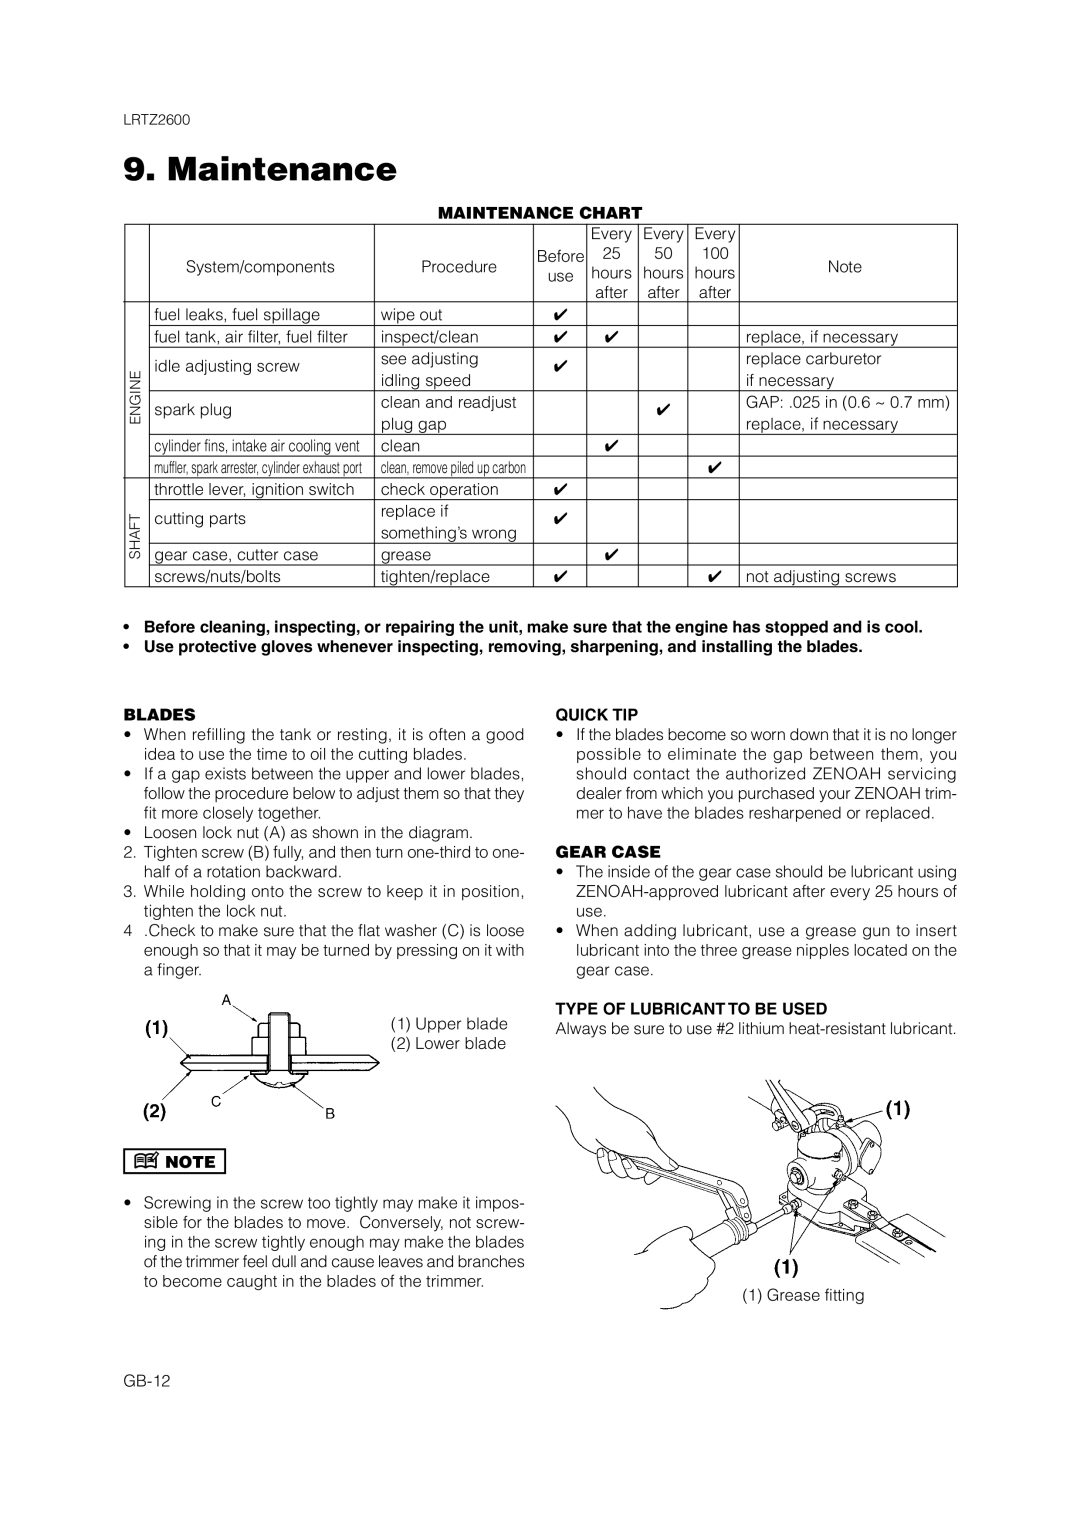 Zenoah LRTZ2600 owner manual Maintenance Chart, Blades, Quick Tip, Gear Case, Type Of Lubricant To Be Used 